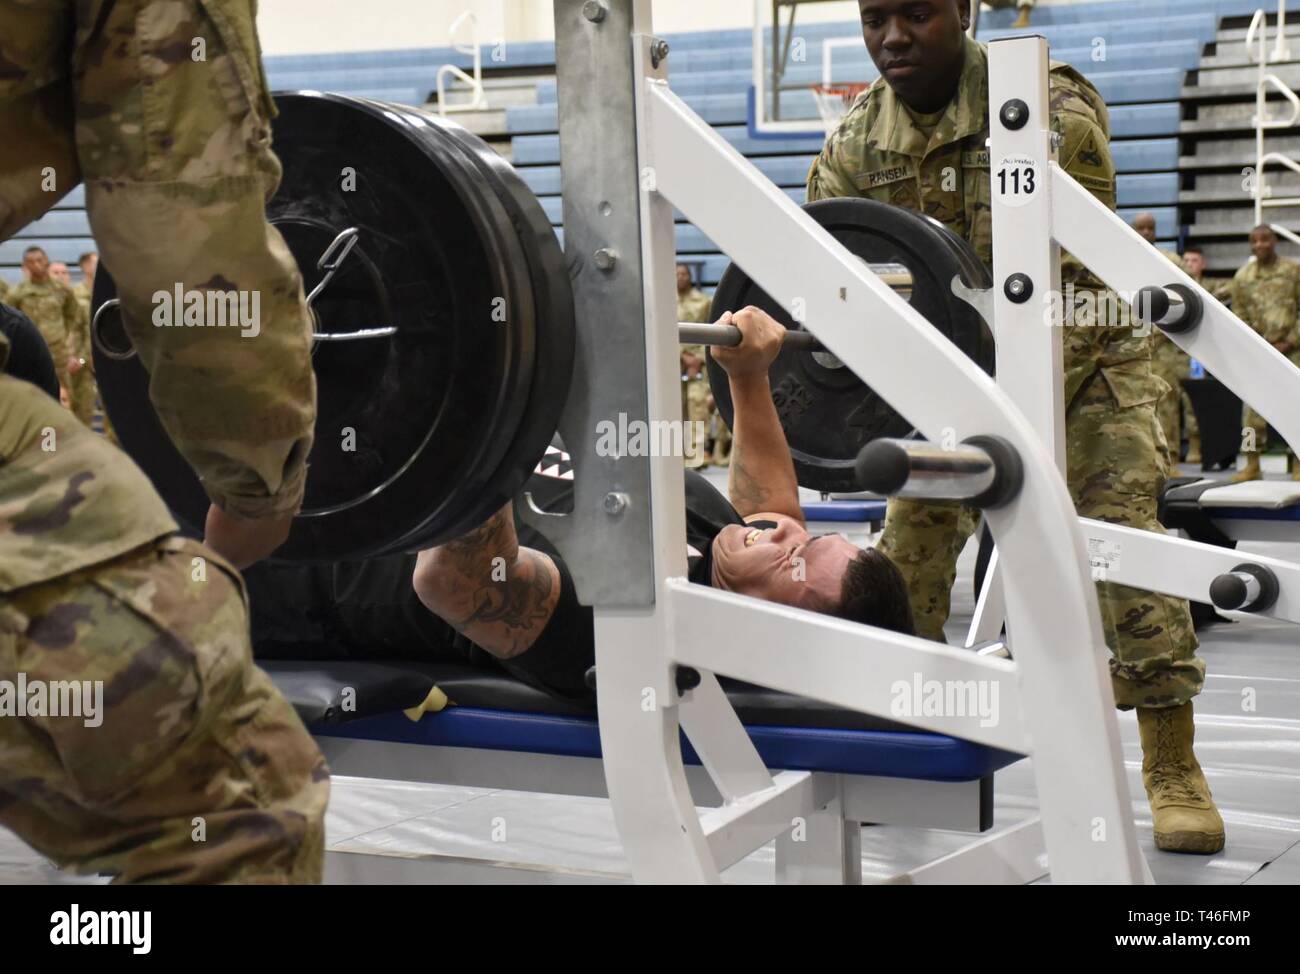 Capt. David Espinoza, a wounded warrior athlete assigned to Warrior Transition Battalion - Hawaii, competes in the men's powerlifting compeition during the 2019 Army Trials, at Fort Bliss, Texas, Mar. 8. Stock Photo